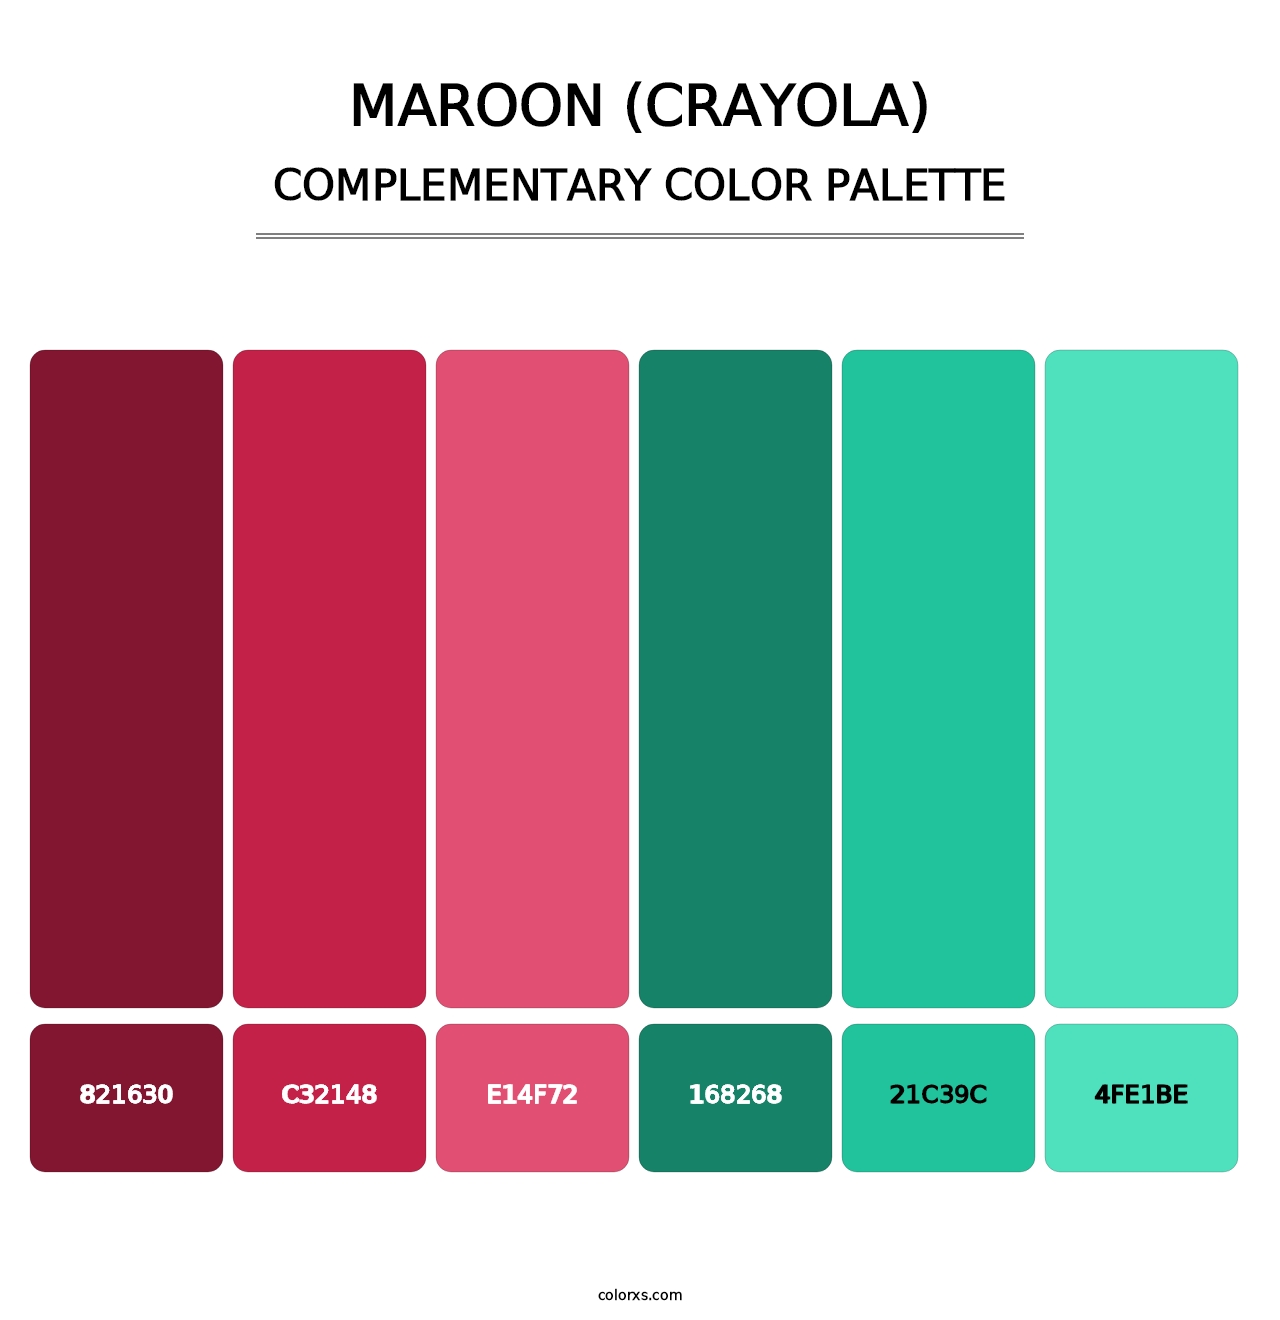 Maroon (Crayola) - Complementary Color Palette